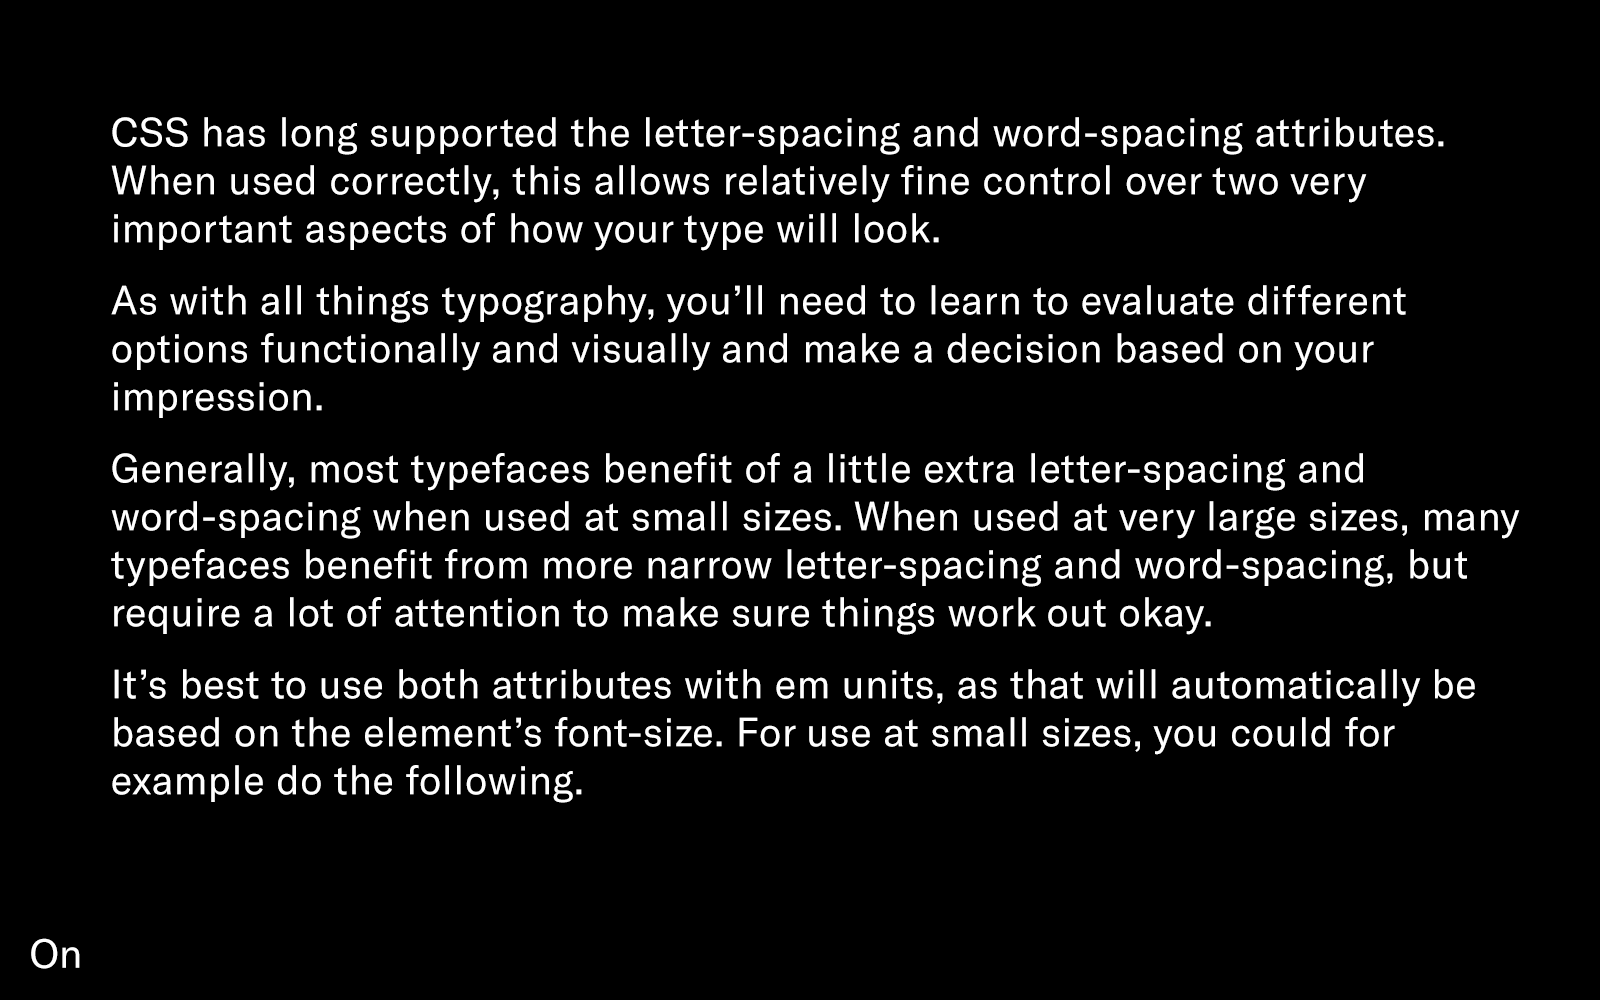 Image to explain letter-spacing and word-spacing